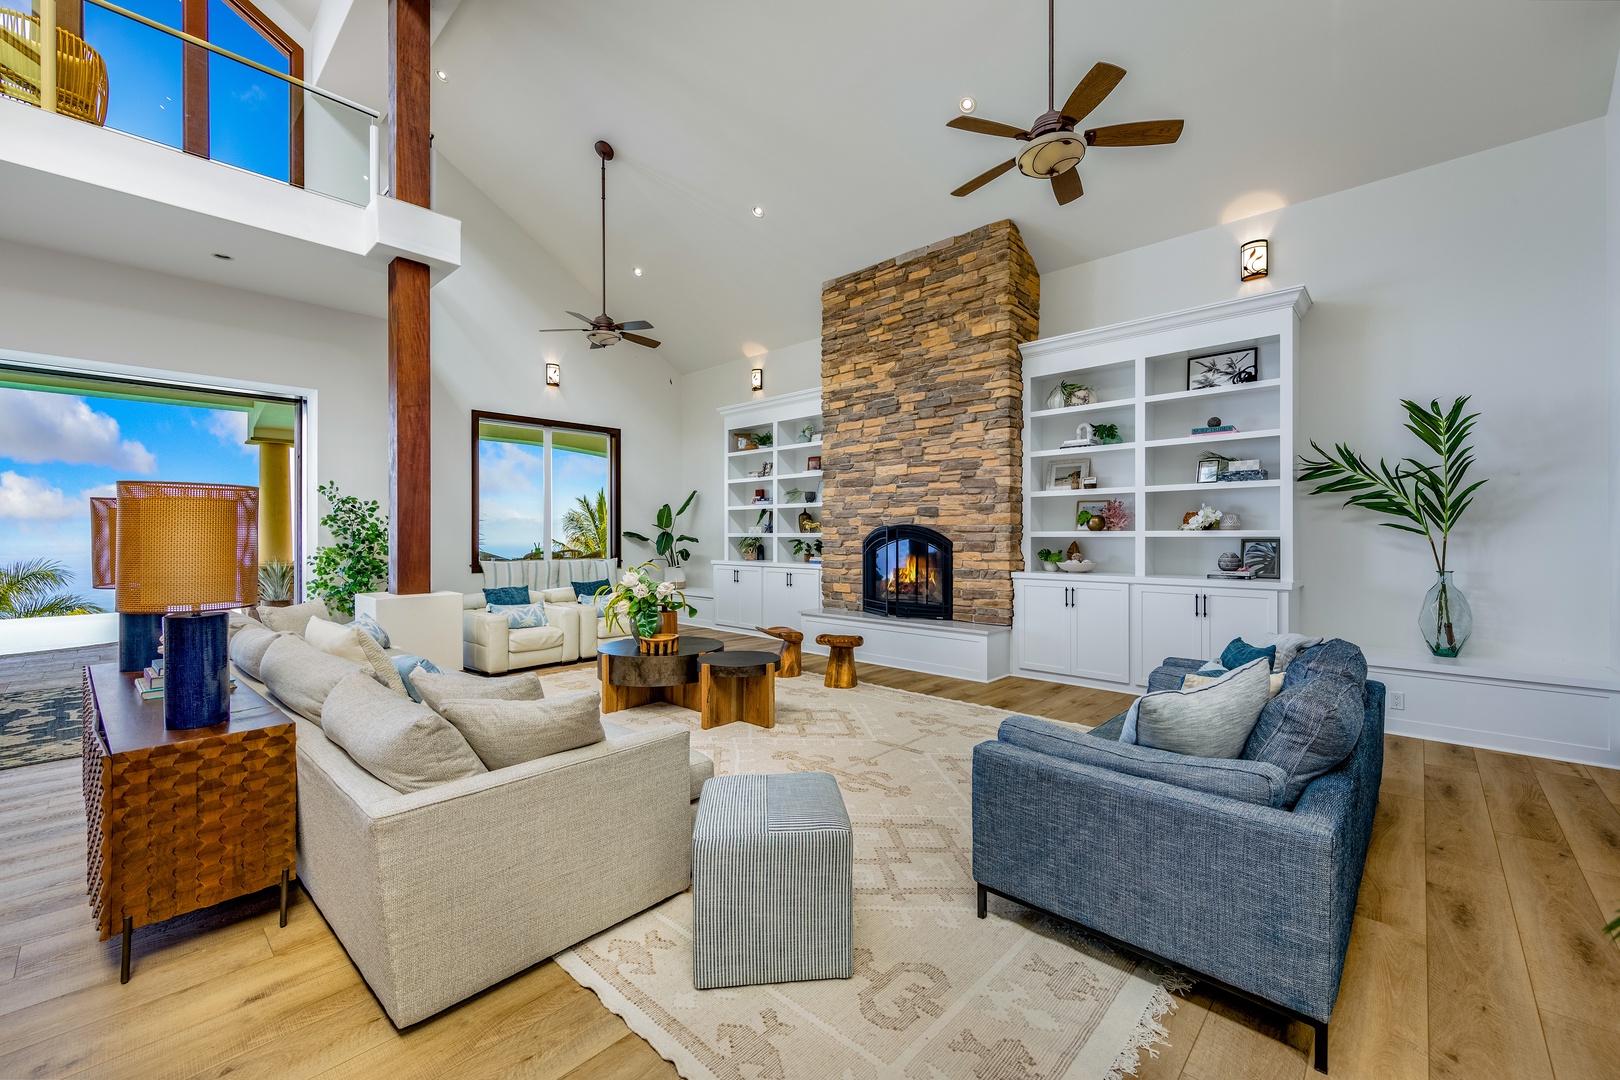 Kailua Kona Vacation Rentals, Kailua Kona Estate** - Spacious living area with a stone fireplace to gather with your loved ones.